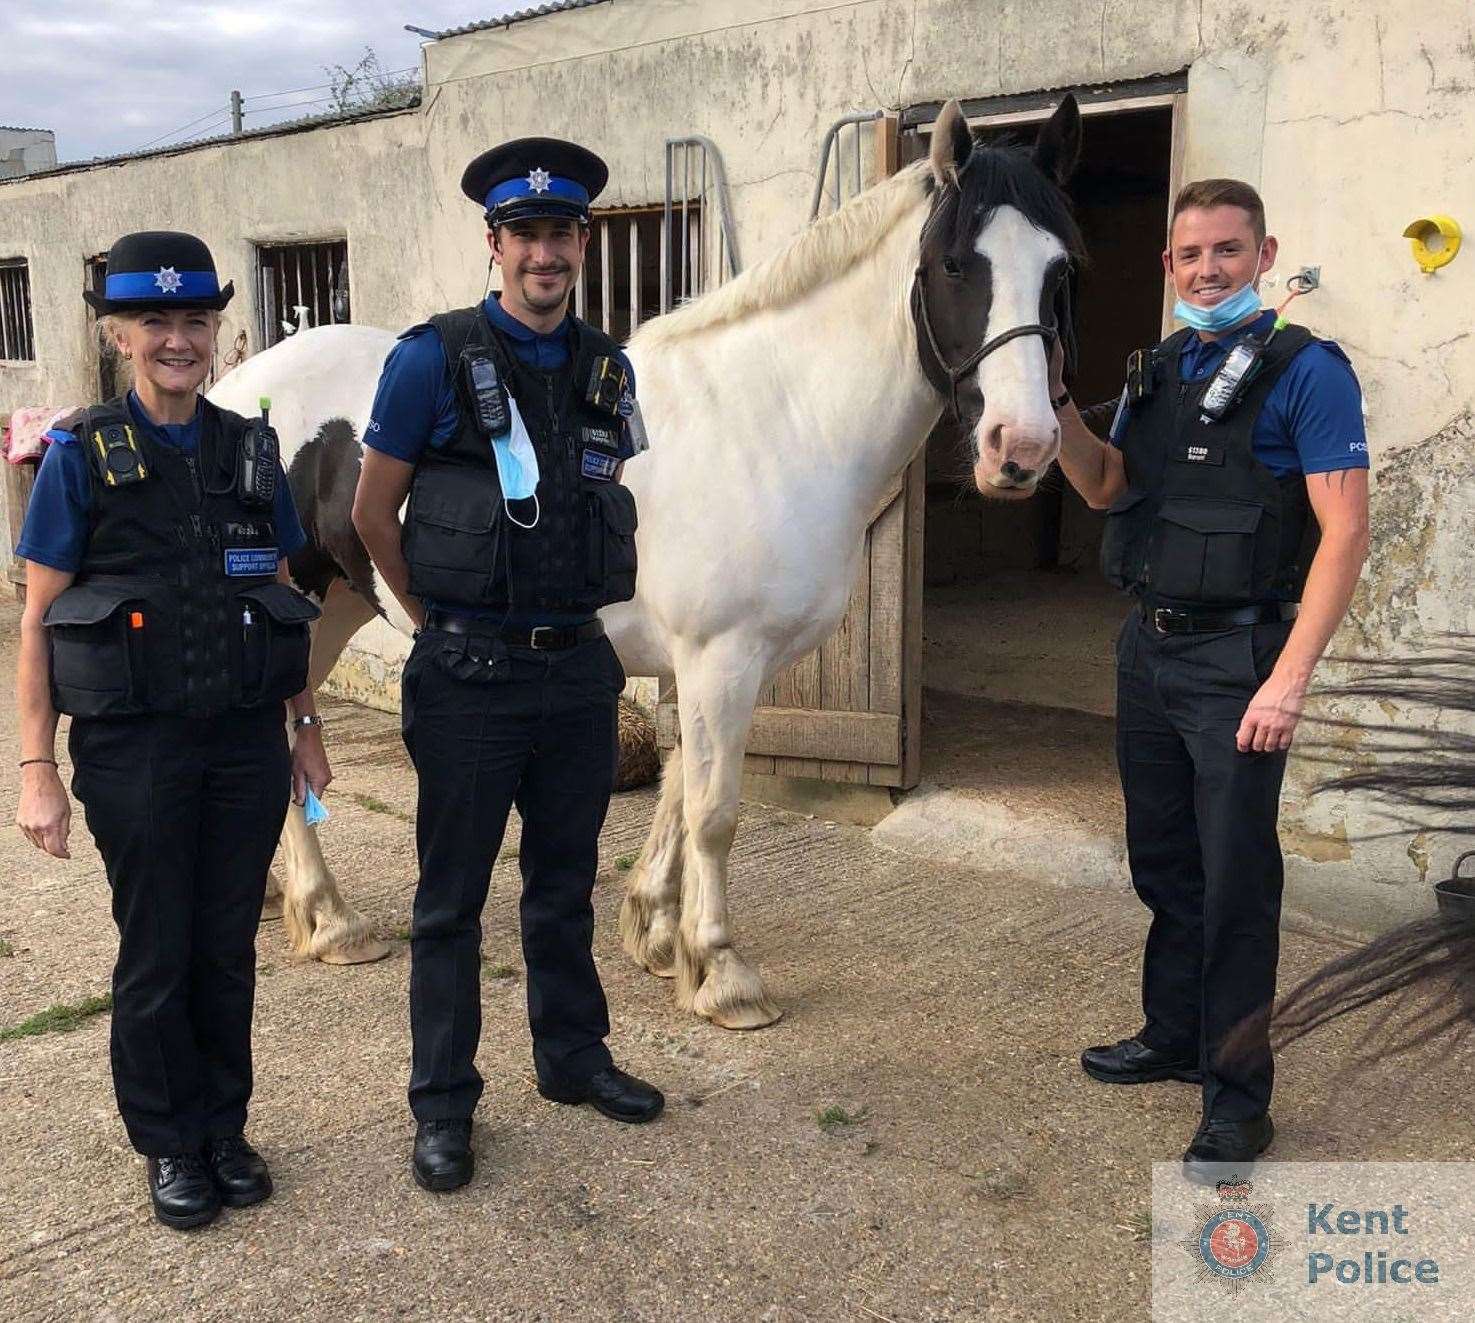 The PCSOs highlighting horse safety. The officers, from left ,are Jeanette Reed, Sean Humphrey and Steve Barrett. Picture: Kent Police